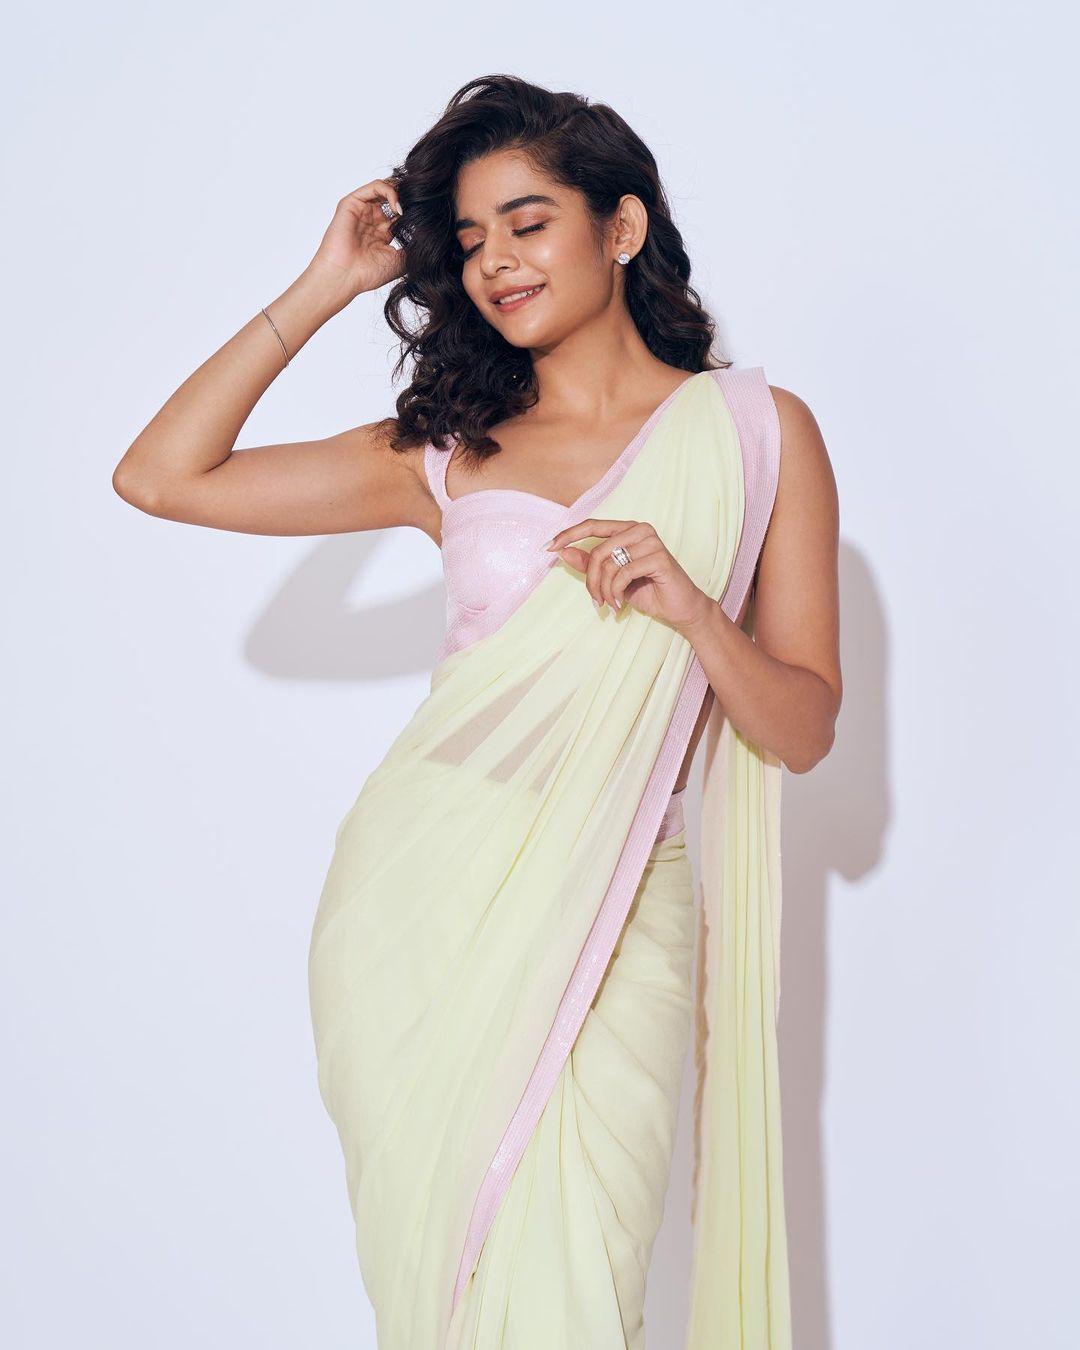 Mithila demonstrates how to keep it simple yet elegant in a light green saree with a lilac border